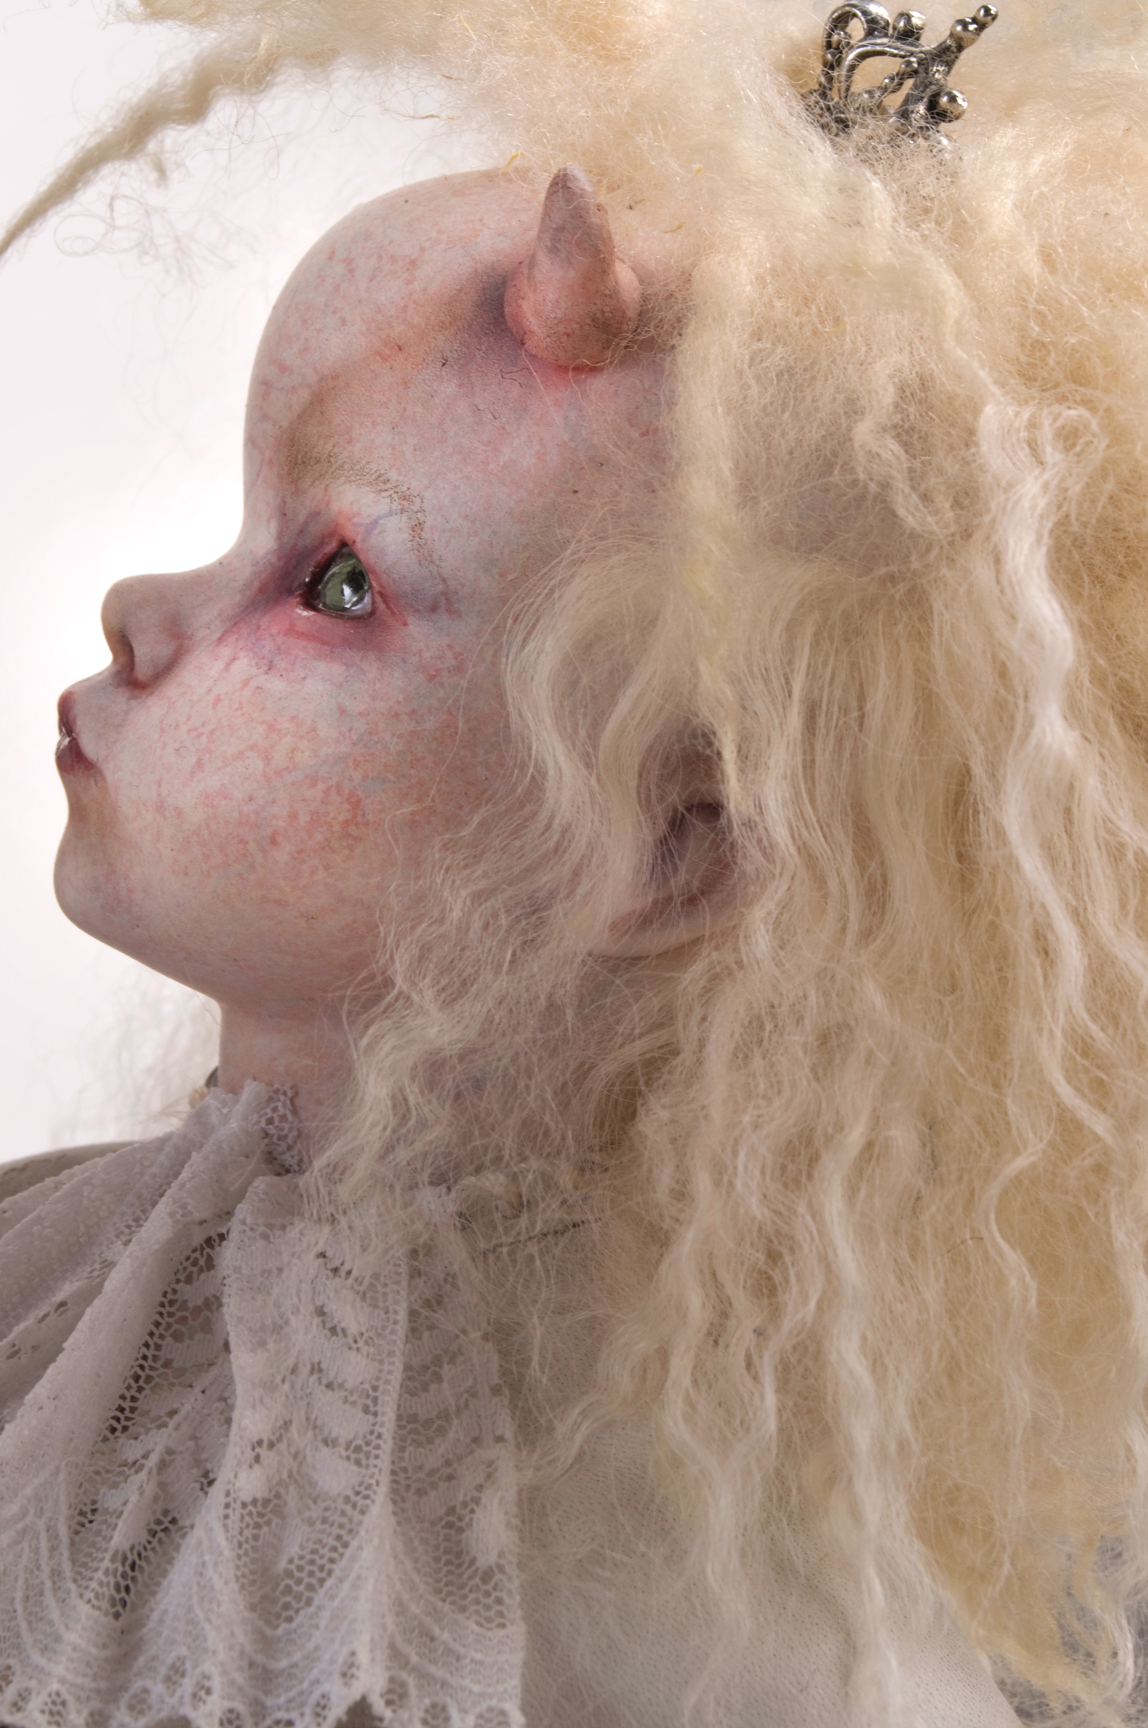 close-up of gothic angel messenger doll white fur mohair wig, horned, pale with white lace collar